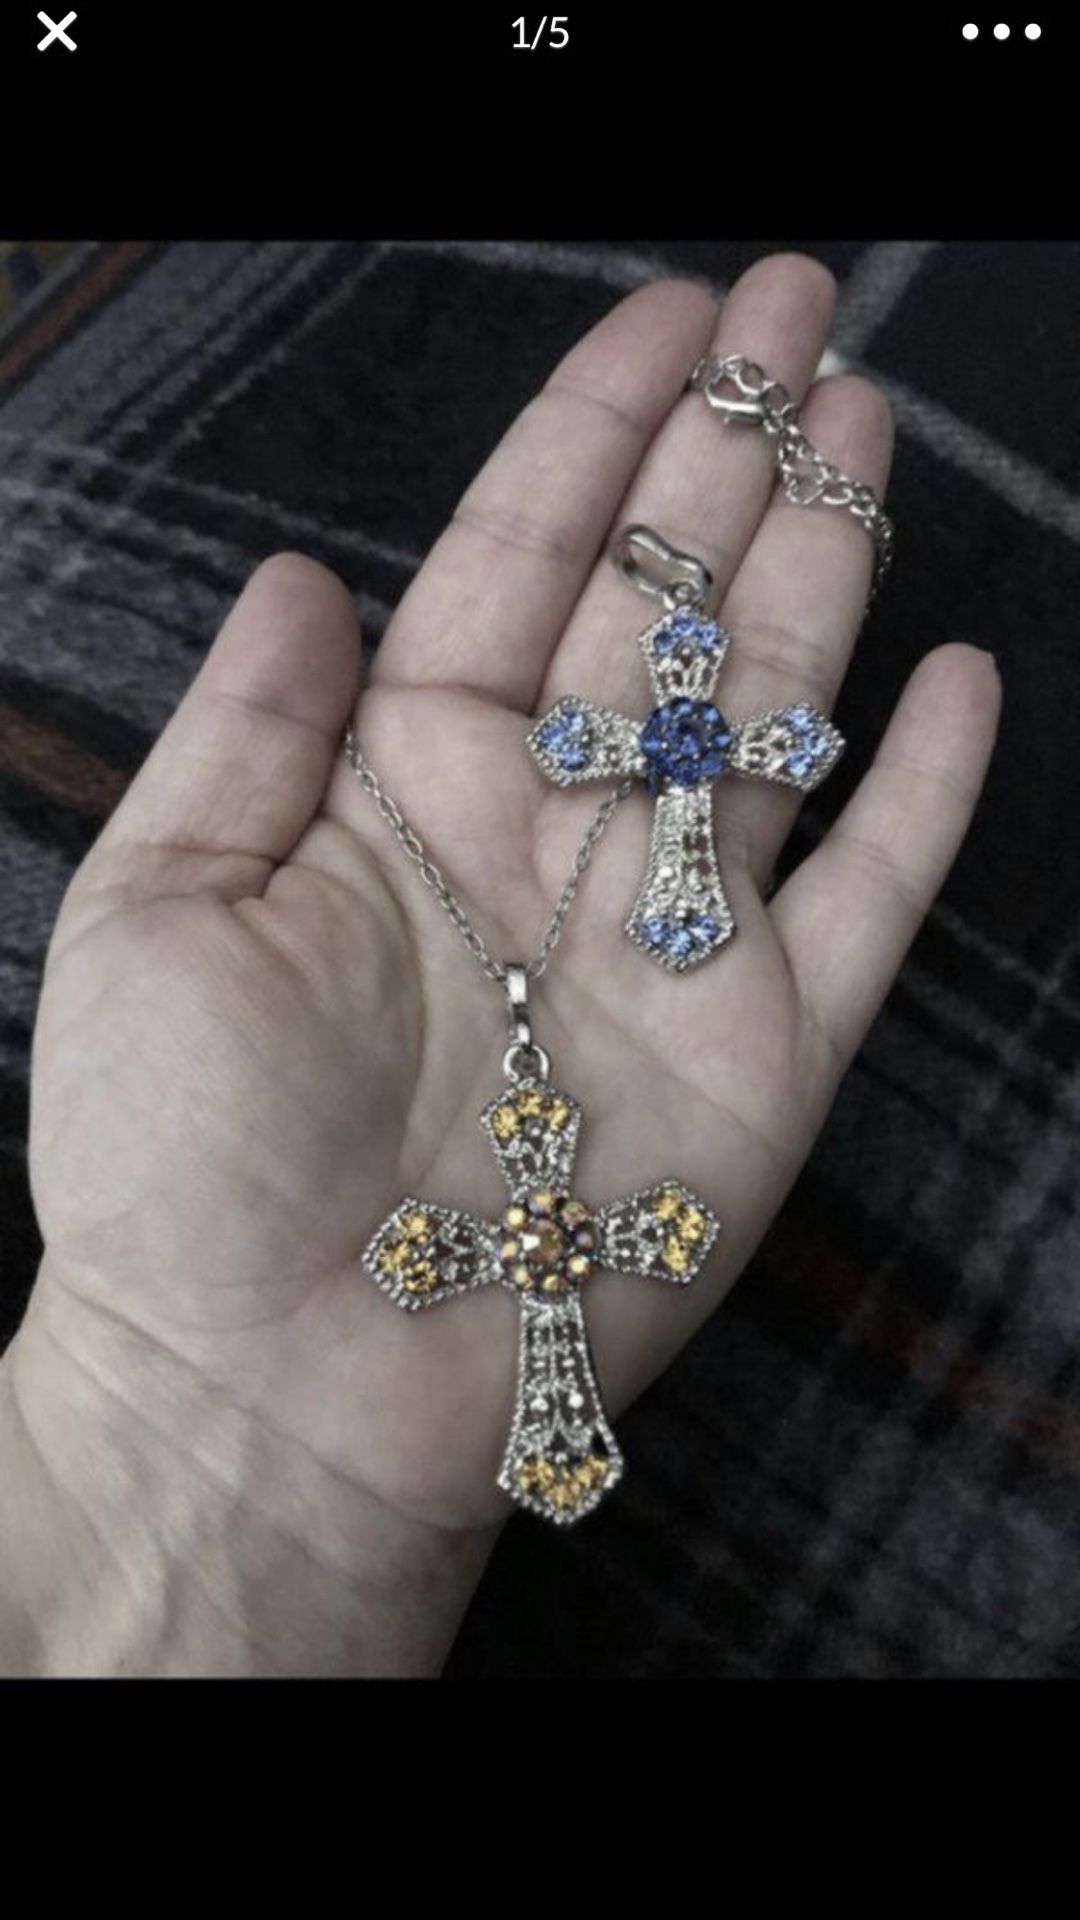 Nice sliver plated yellow cross necklace with blue cross charm set